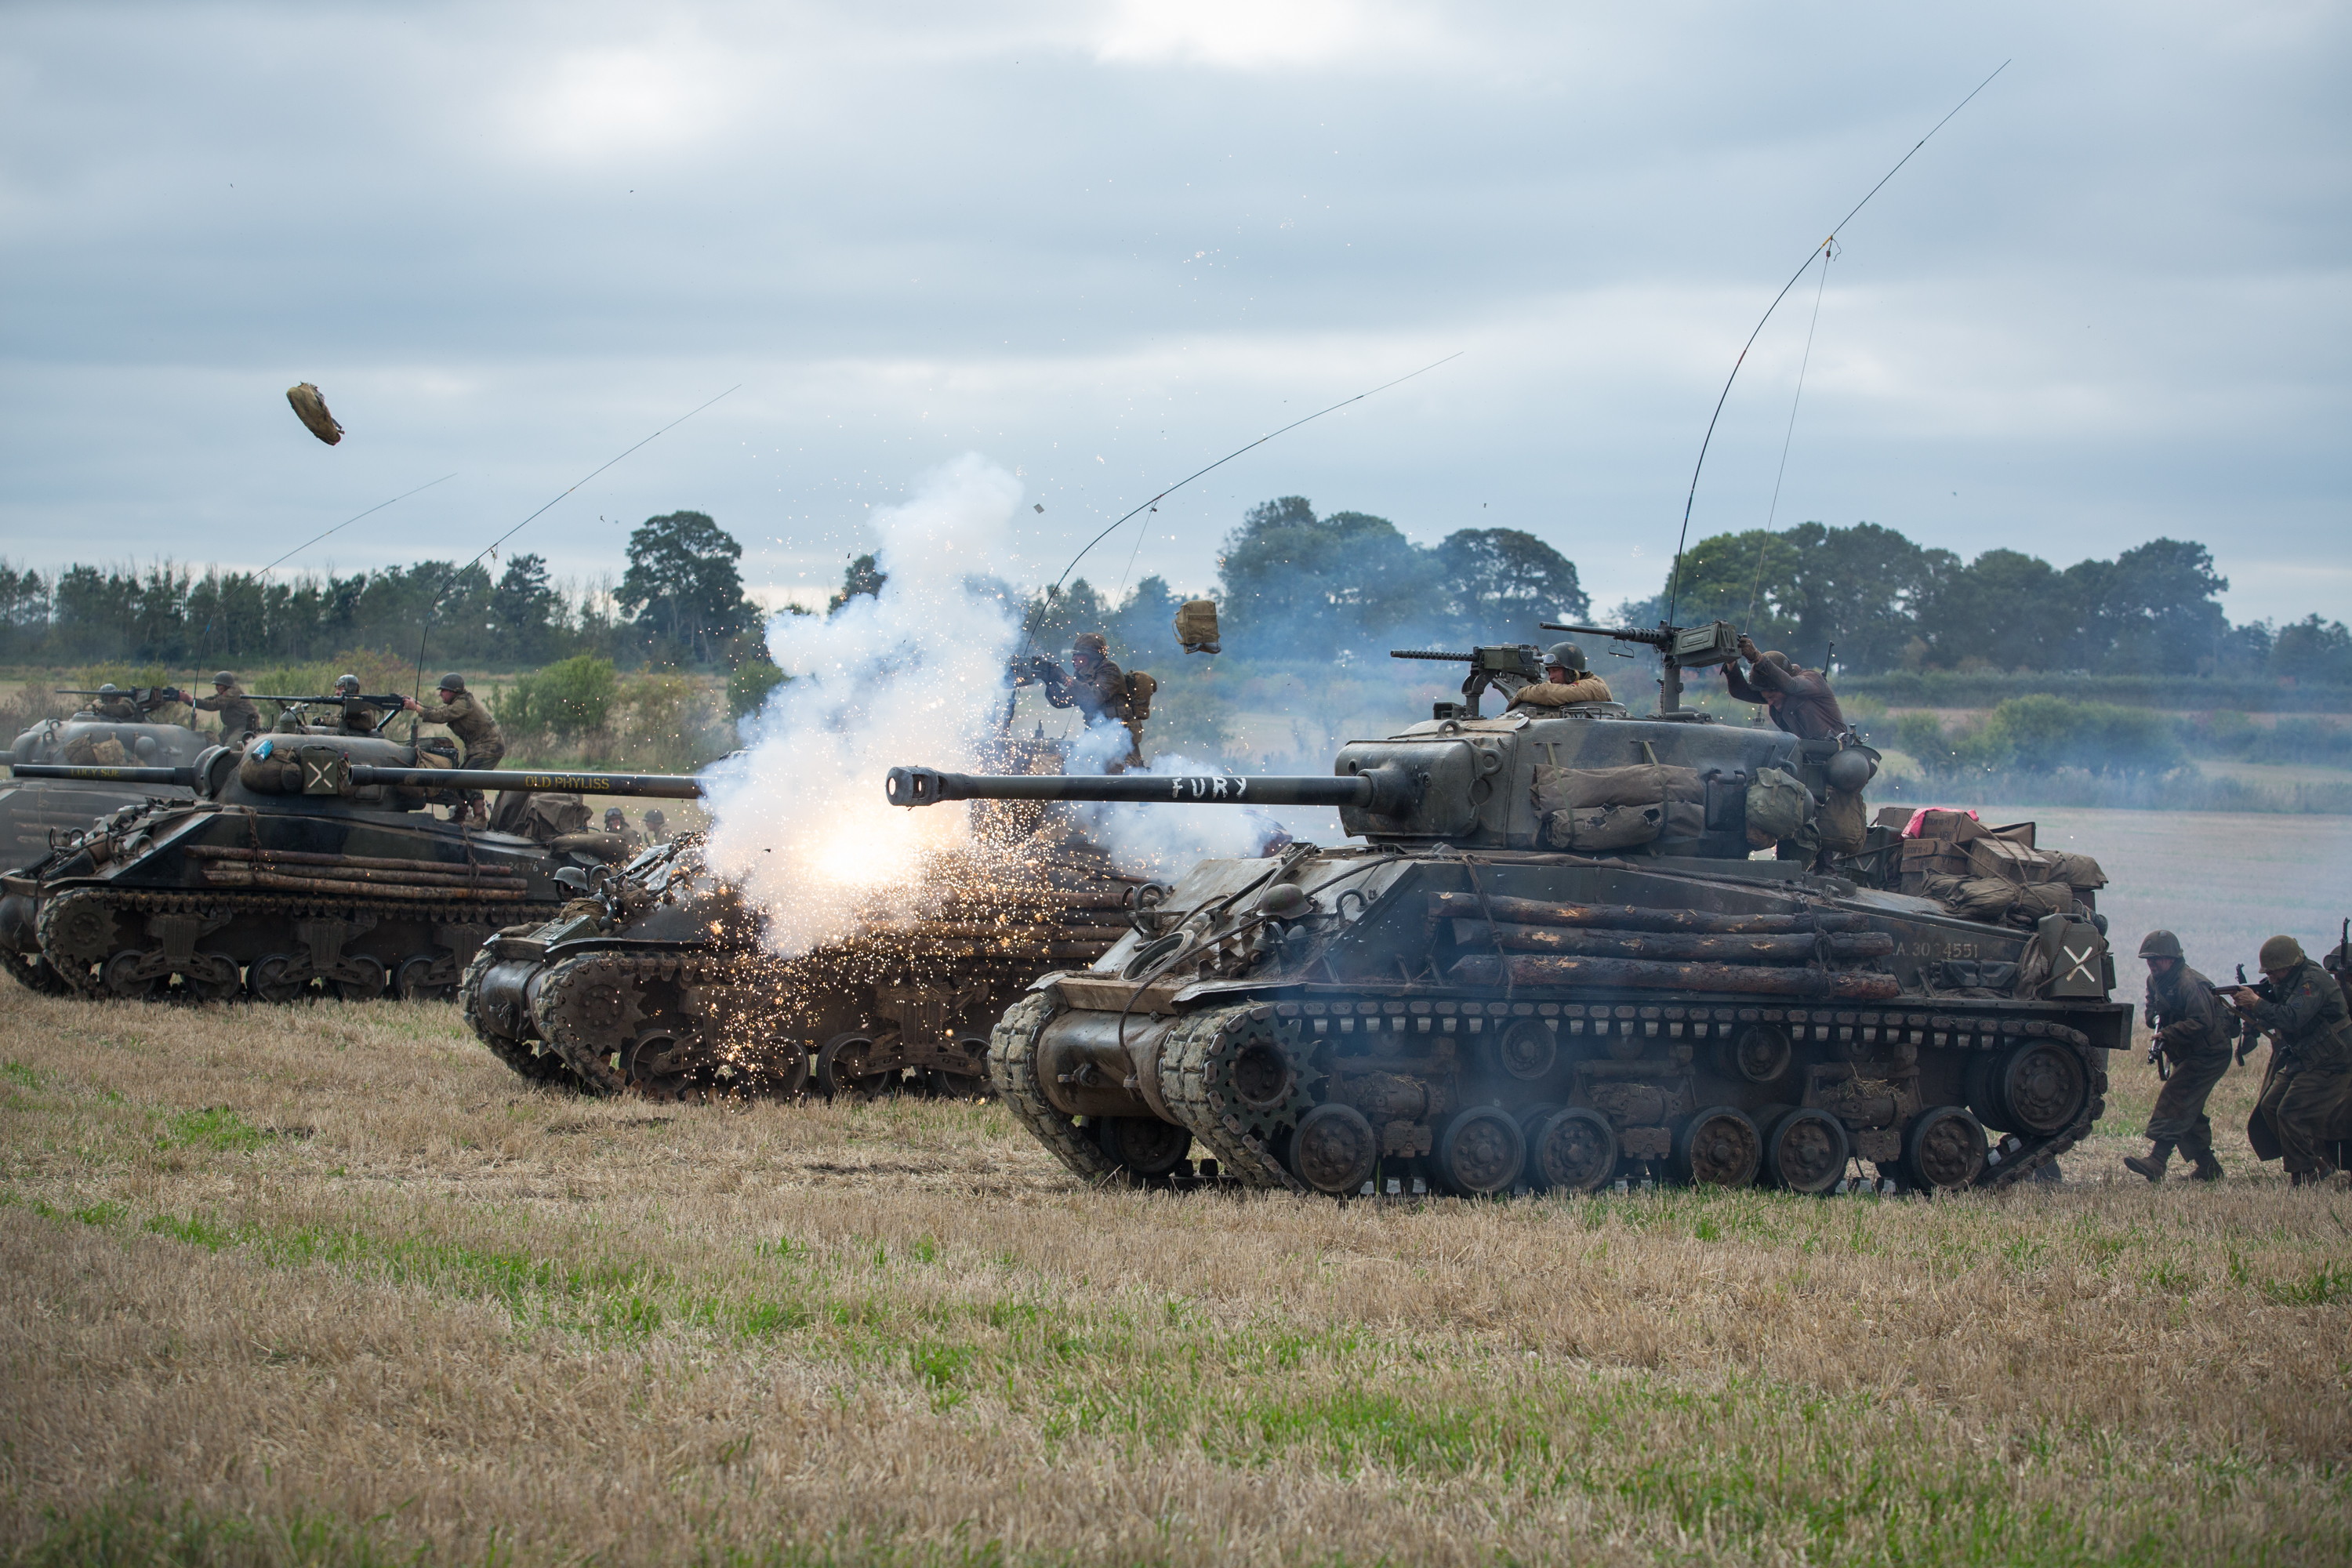 The Beetfield Battle with the Fury Tank in Columbia Pictures' FURY.